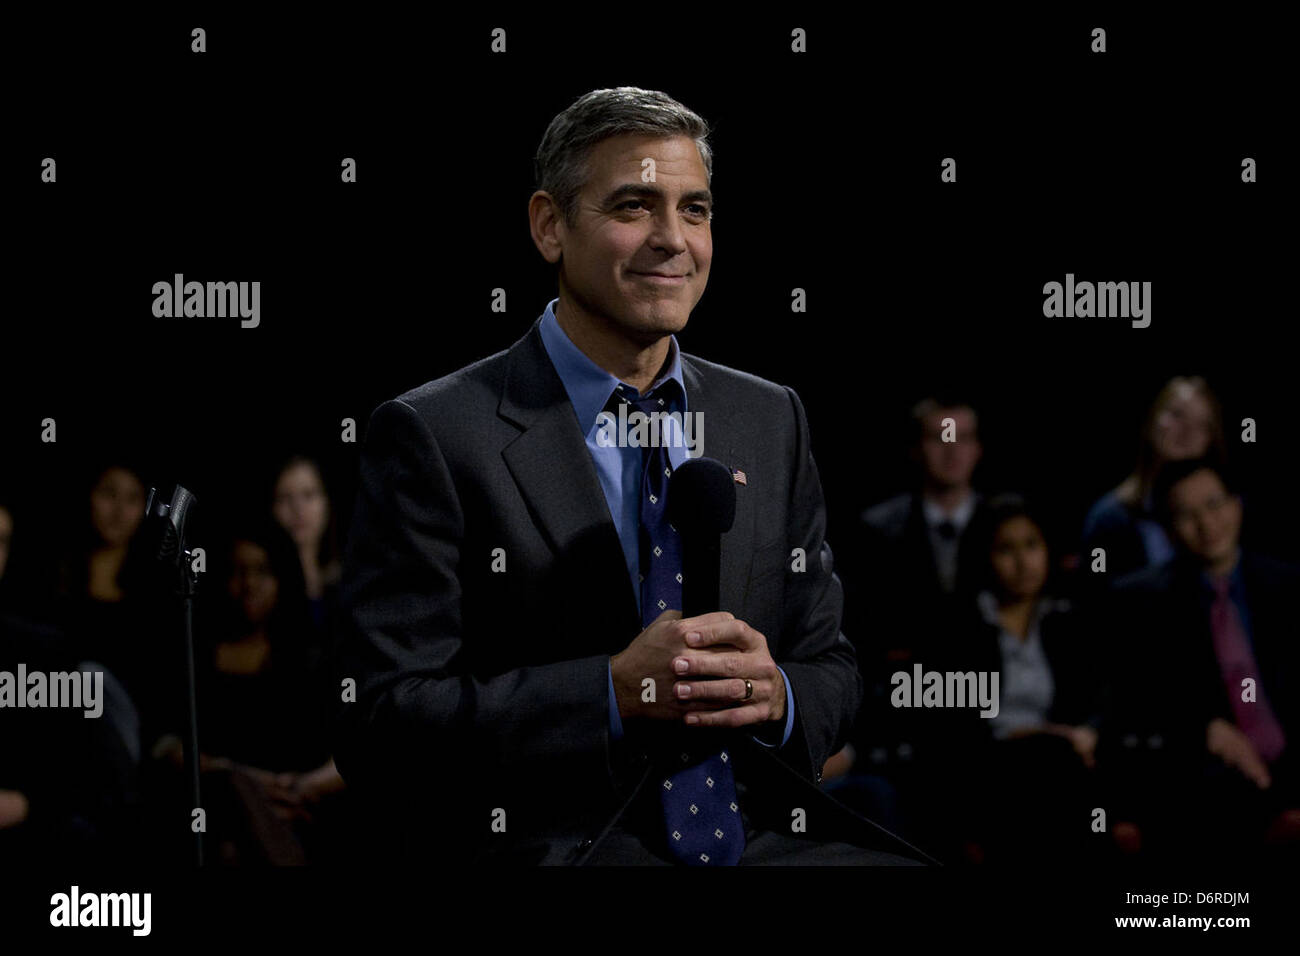 George Clooney appearing in the film 'The Ides of March' 2011 This is a PR photo. WENN does not claim any Copyright or License Stock Photo